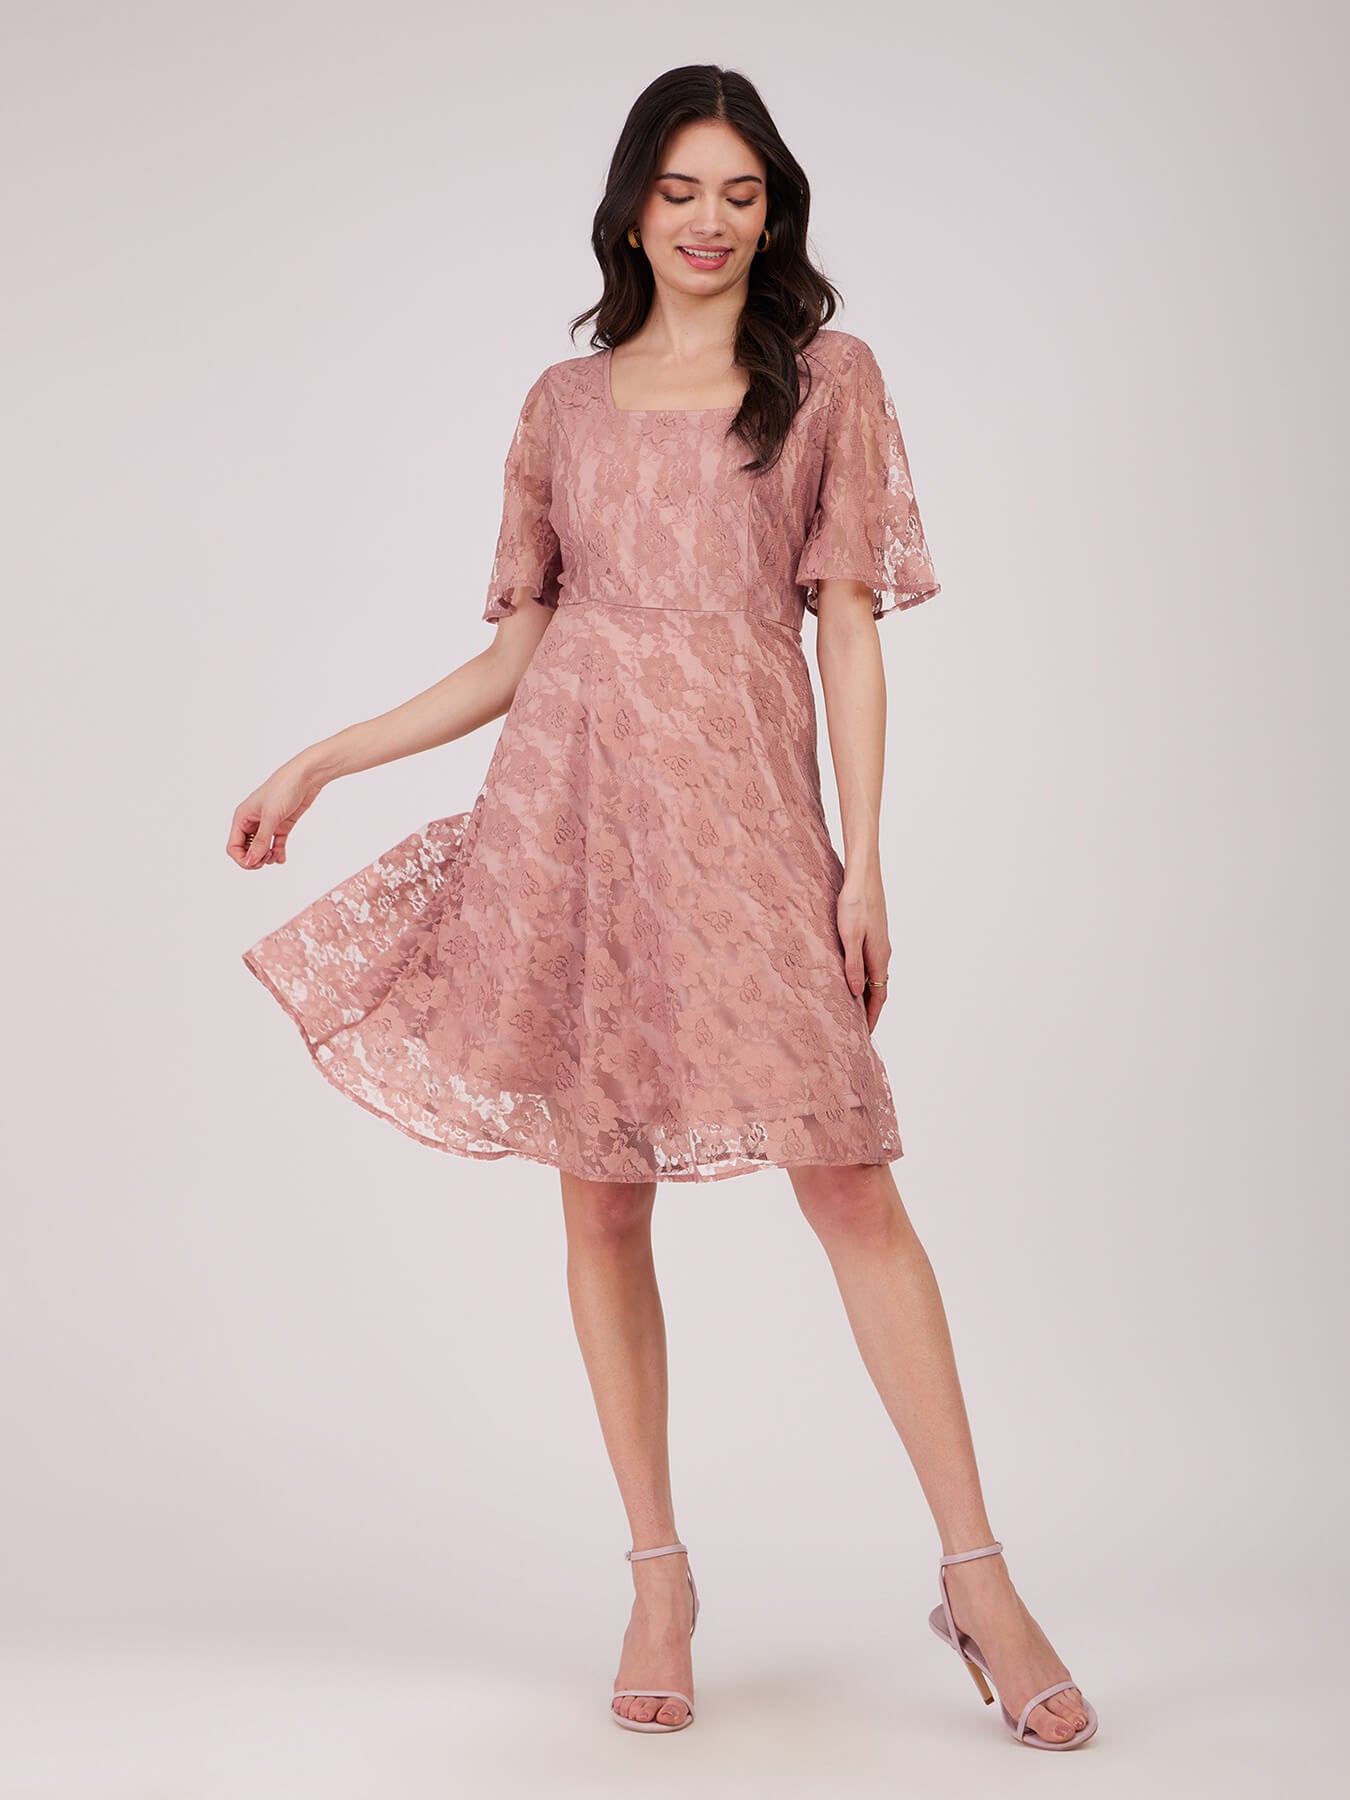 Fit And Flare Skater Dress - Dusty Pink